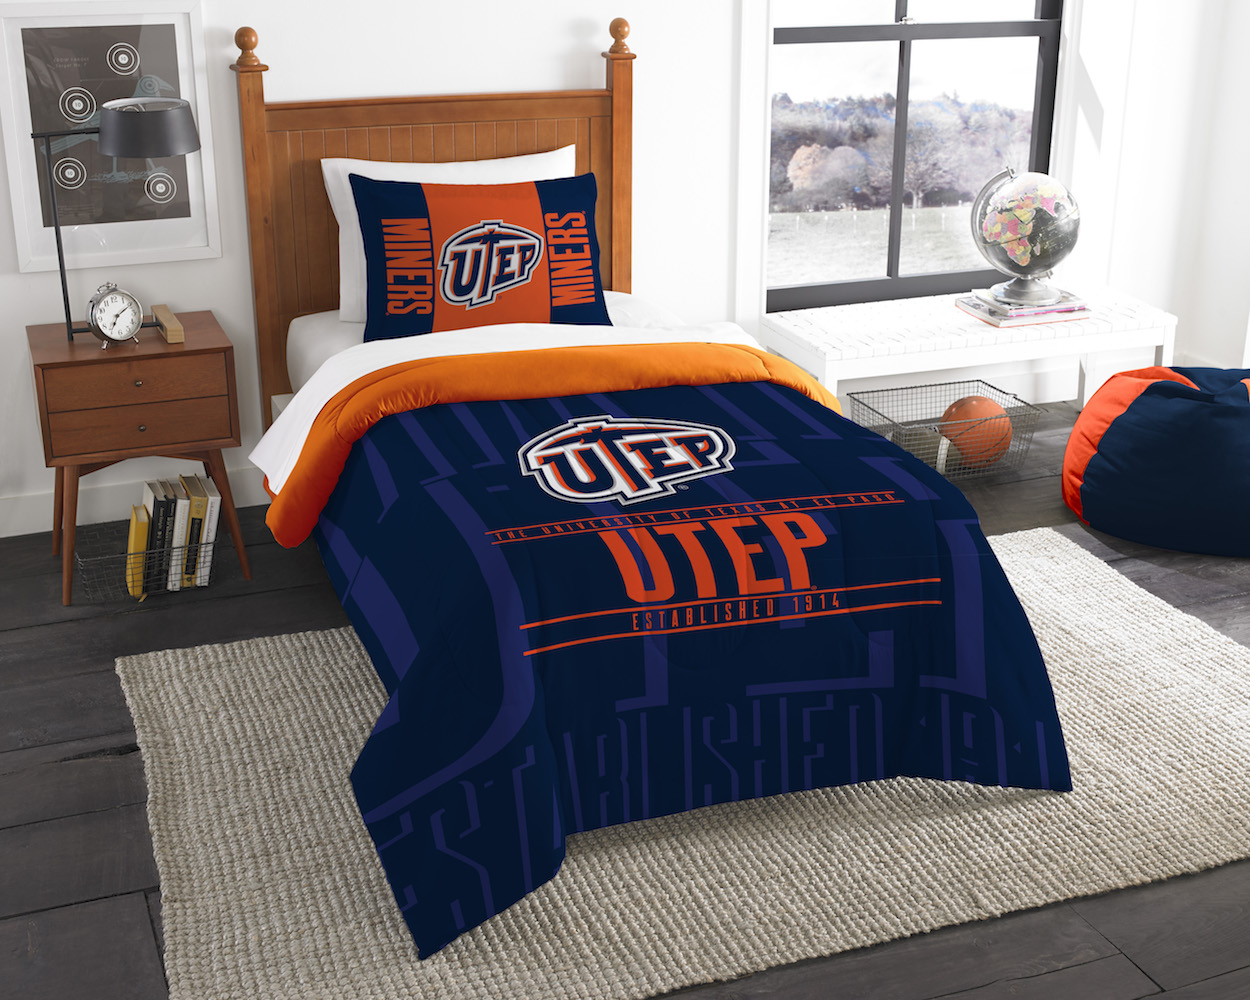 UTEP Miners Twin Comforter Set with Sham